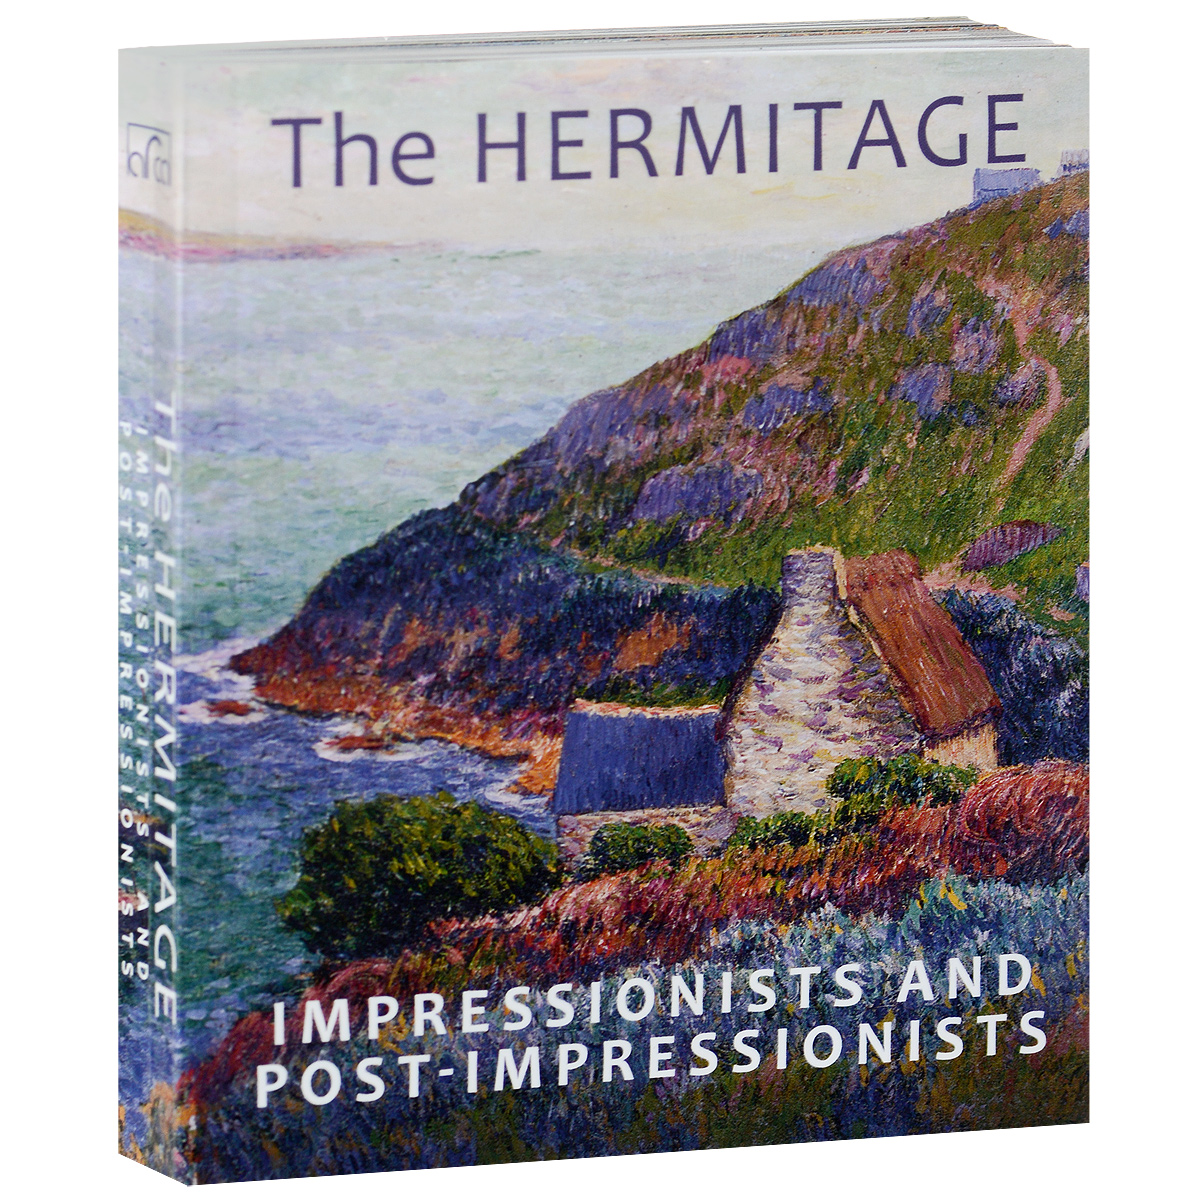 The Hermitage: Impressionists and Post-impressionists